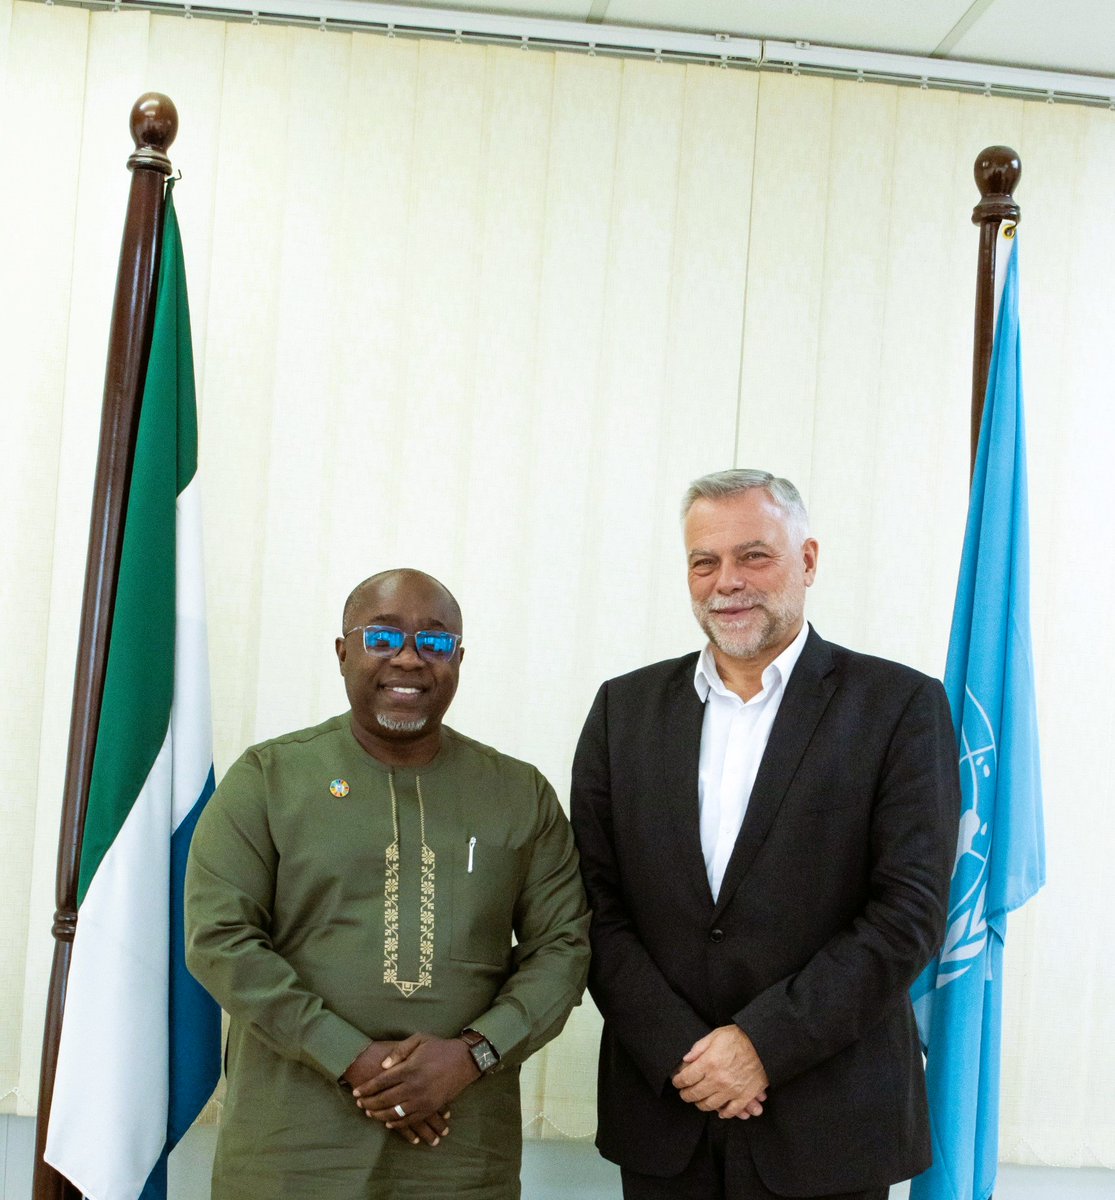 Today, we held a productive meeting with the Head of @EUinSierraLeone’s Rural Development & Infrastructure, Holger Rommen. We discussed innovative renewable energy solutions to empower rural communities in Sierra Leone.